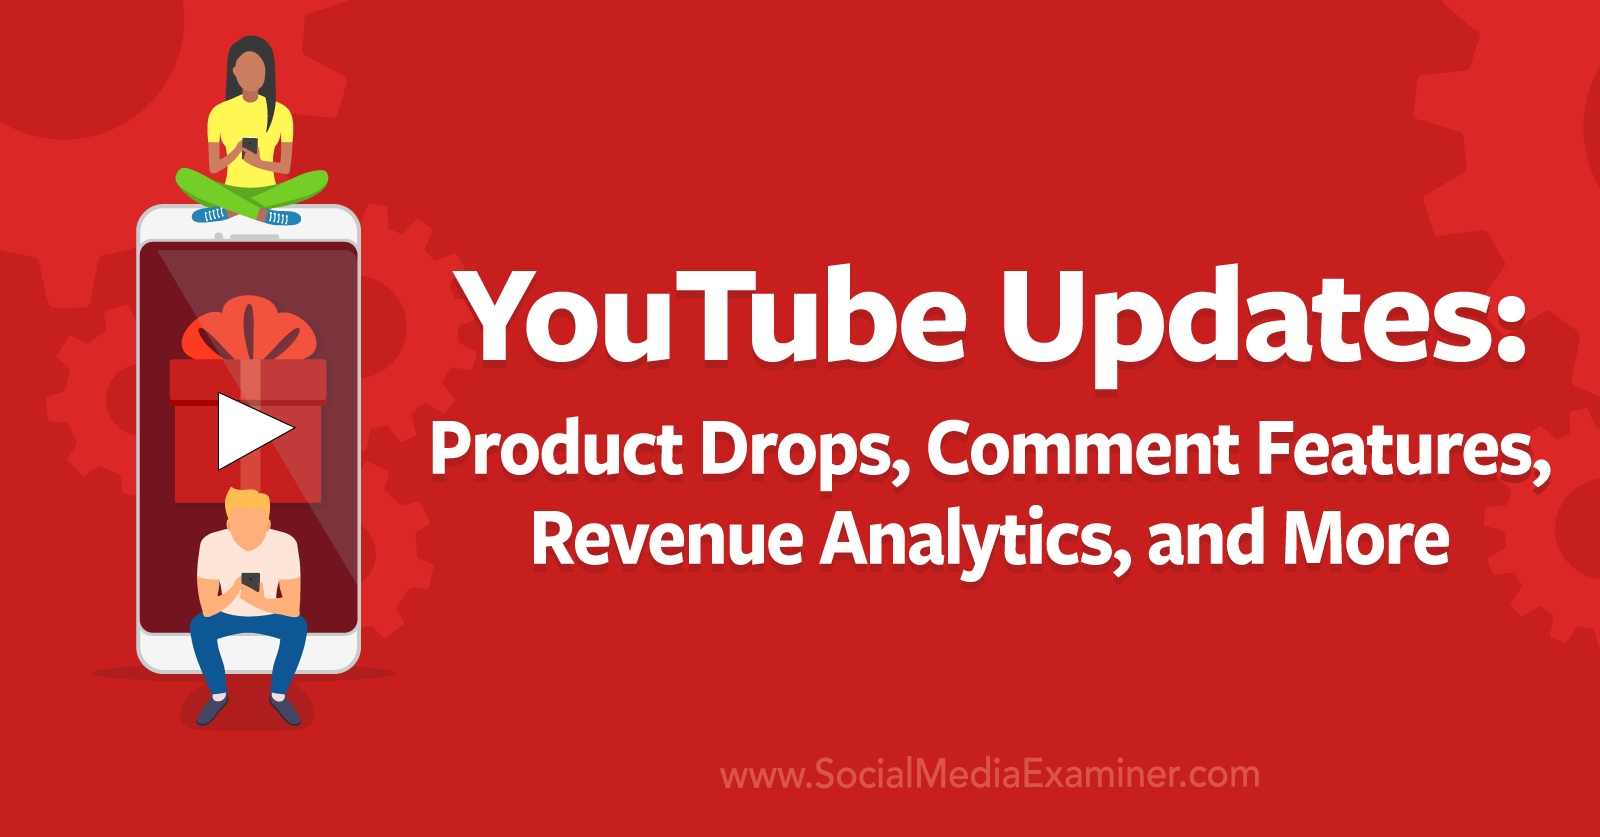 YouTube Updates: Product Drops, Comment Features, Revenue Analytics, and More by Social Media Examiner